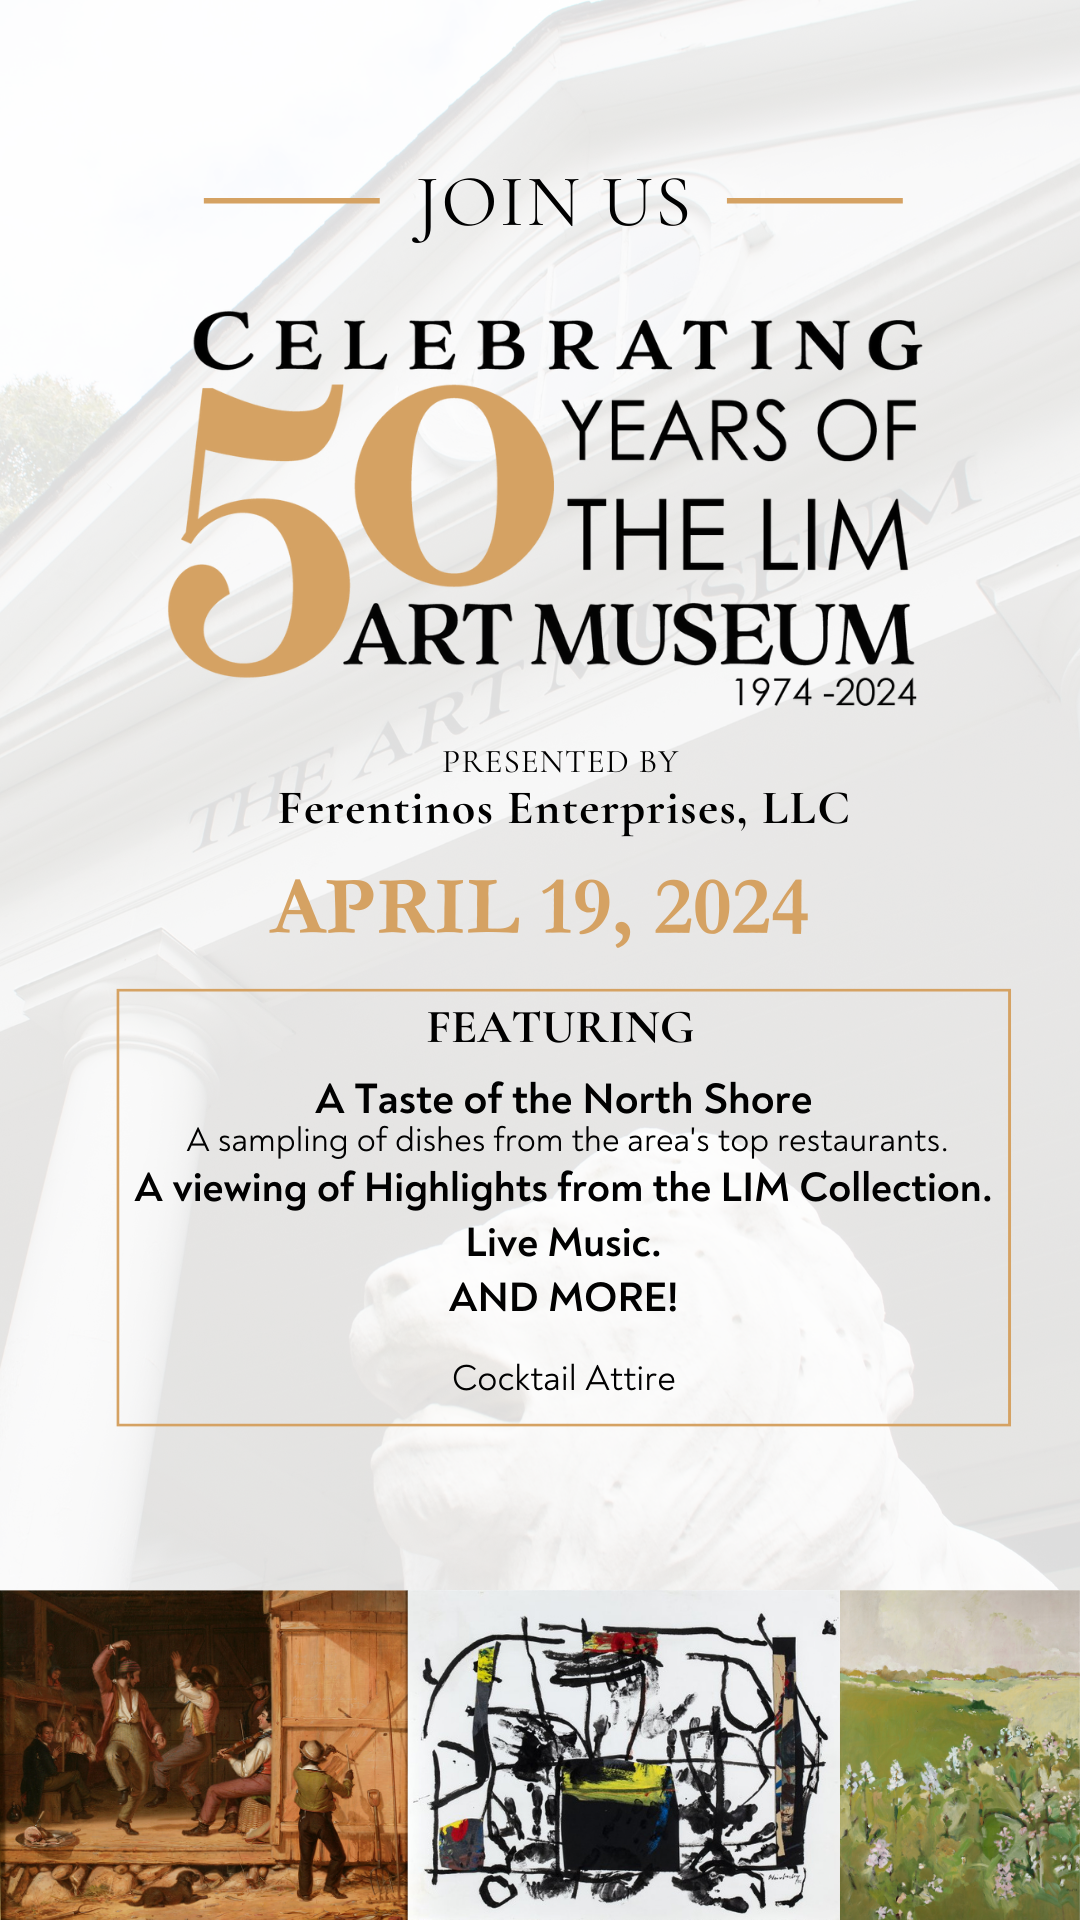 Celebrating 50 Years of the LIM Art Museum